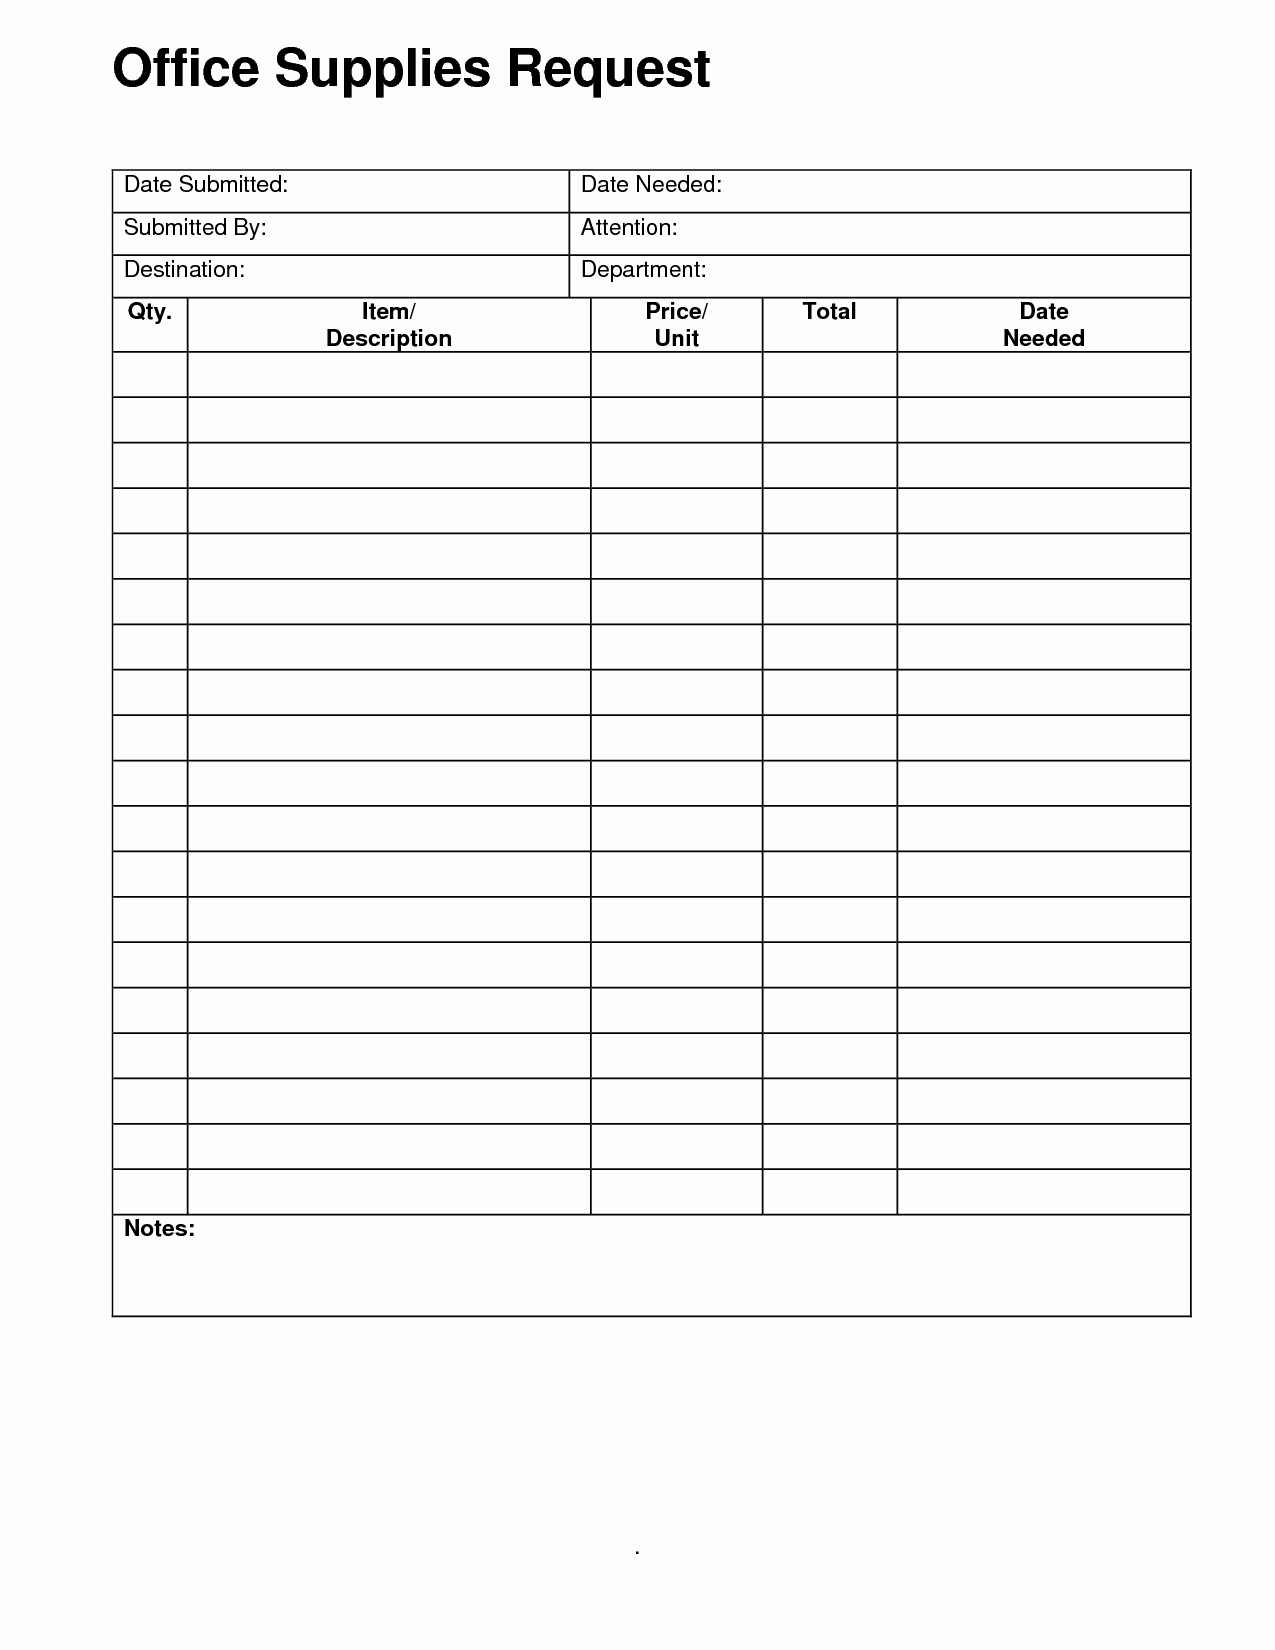 Office Supply Checklist Template Awesome Fice Supply Checklist Templates for Your Business Violeet